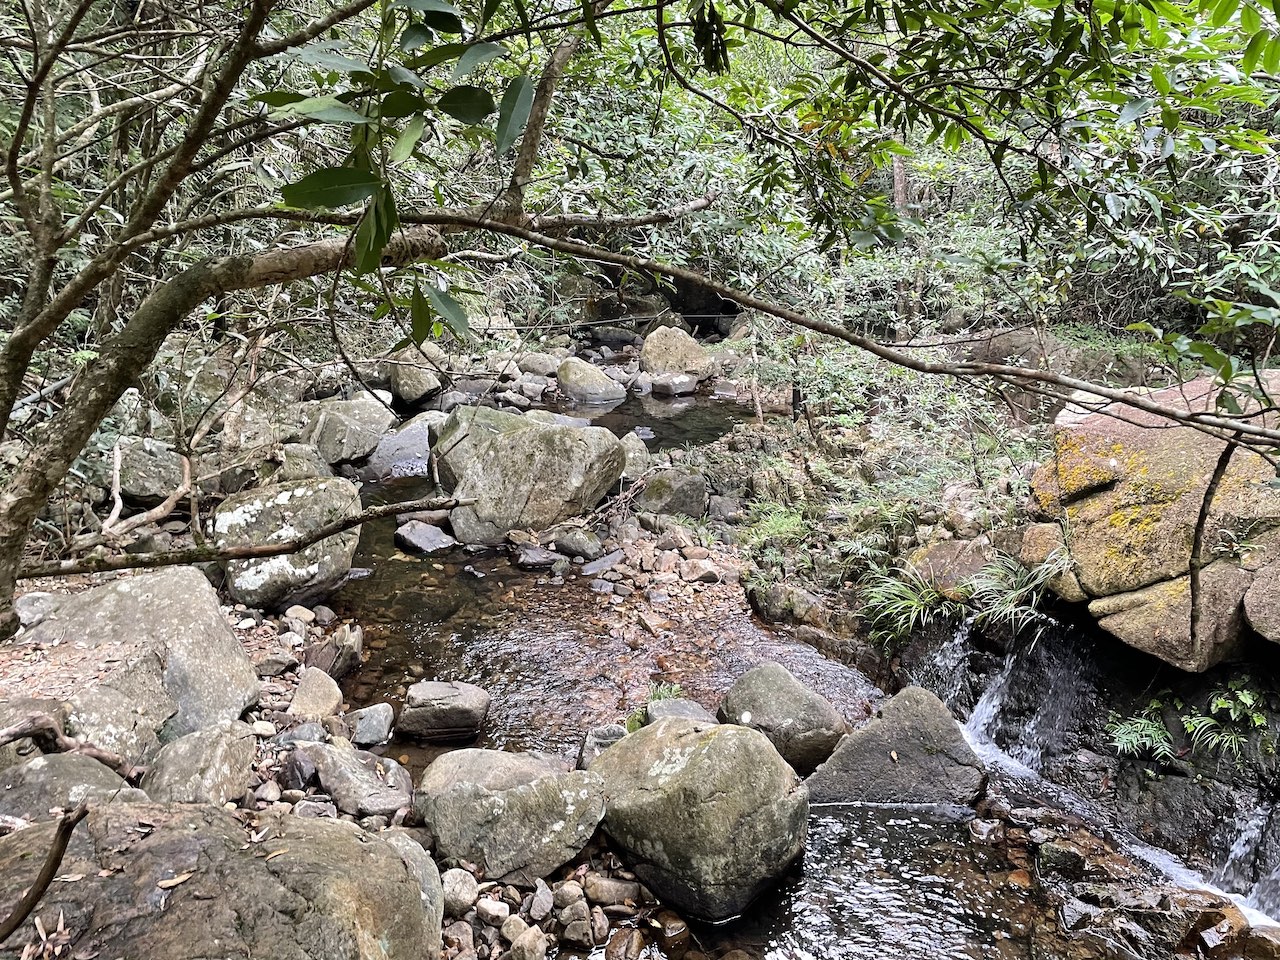 The Tai Po Kau river to be seen in all of the walks